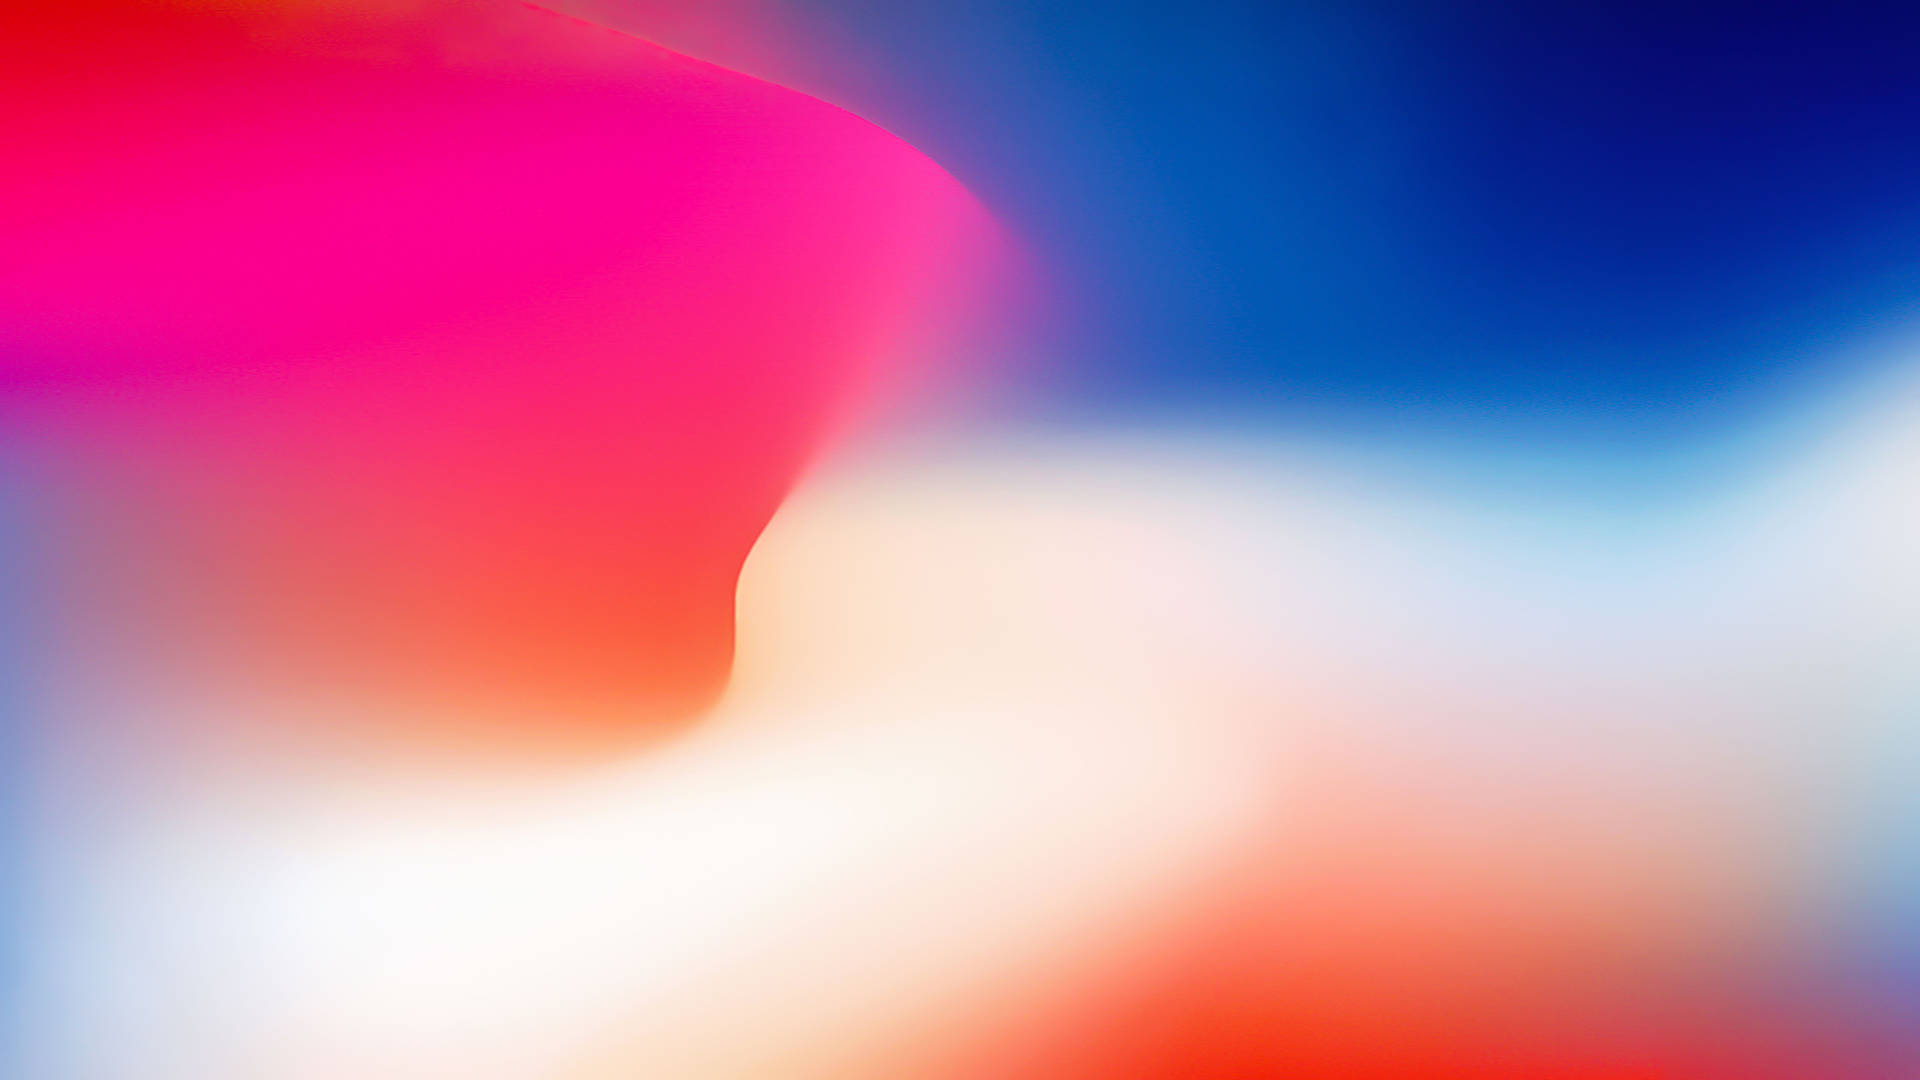 Colorful gradient pink, blue white and orange wallpaper.